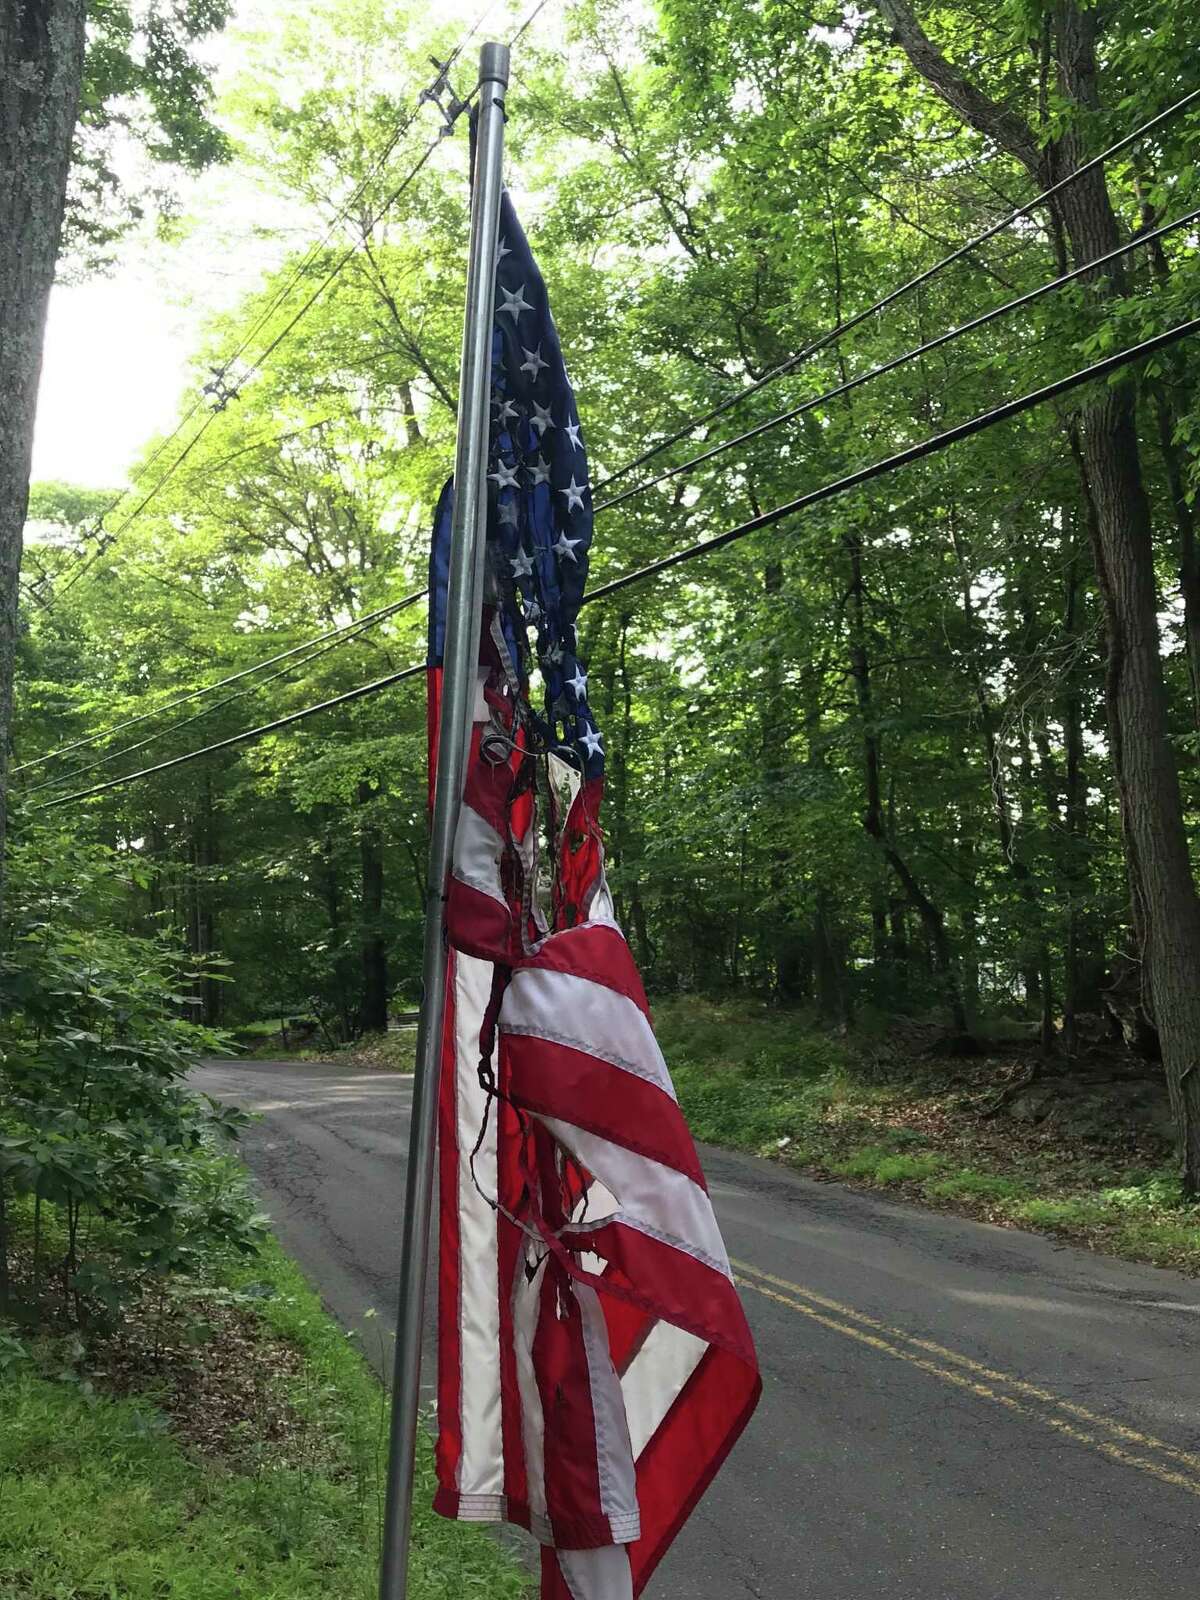 Two American flags were burned on Barrack Hill Road in Ridgefield during the overnight hours of Sunday, July 7, and Monday, July 8.